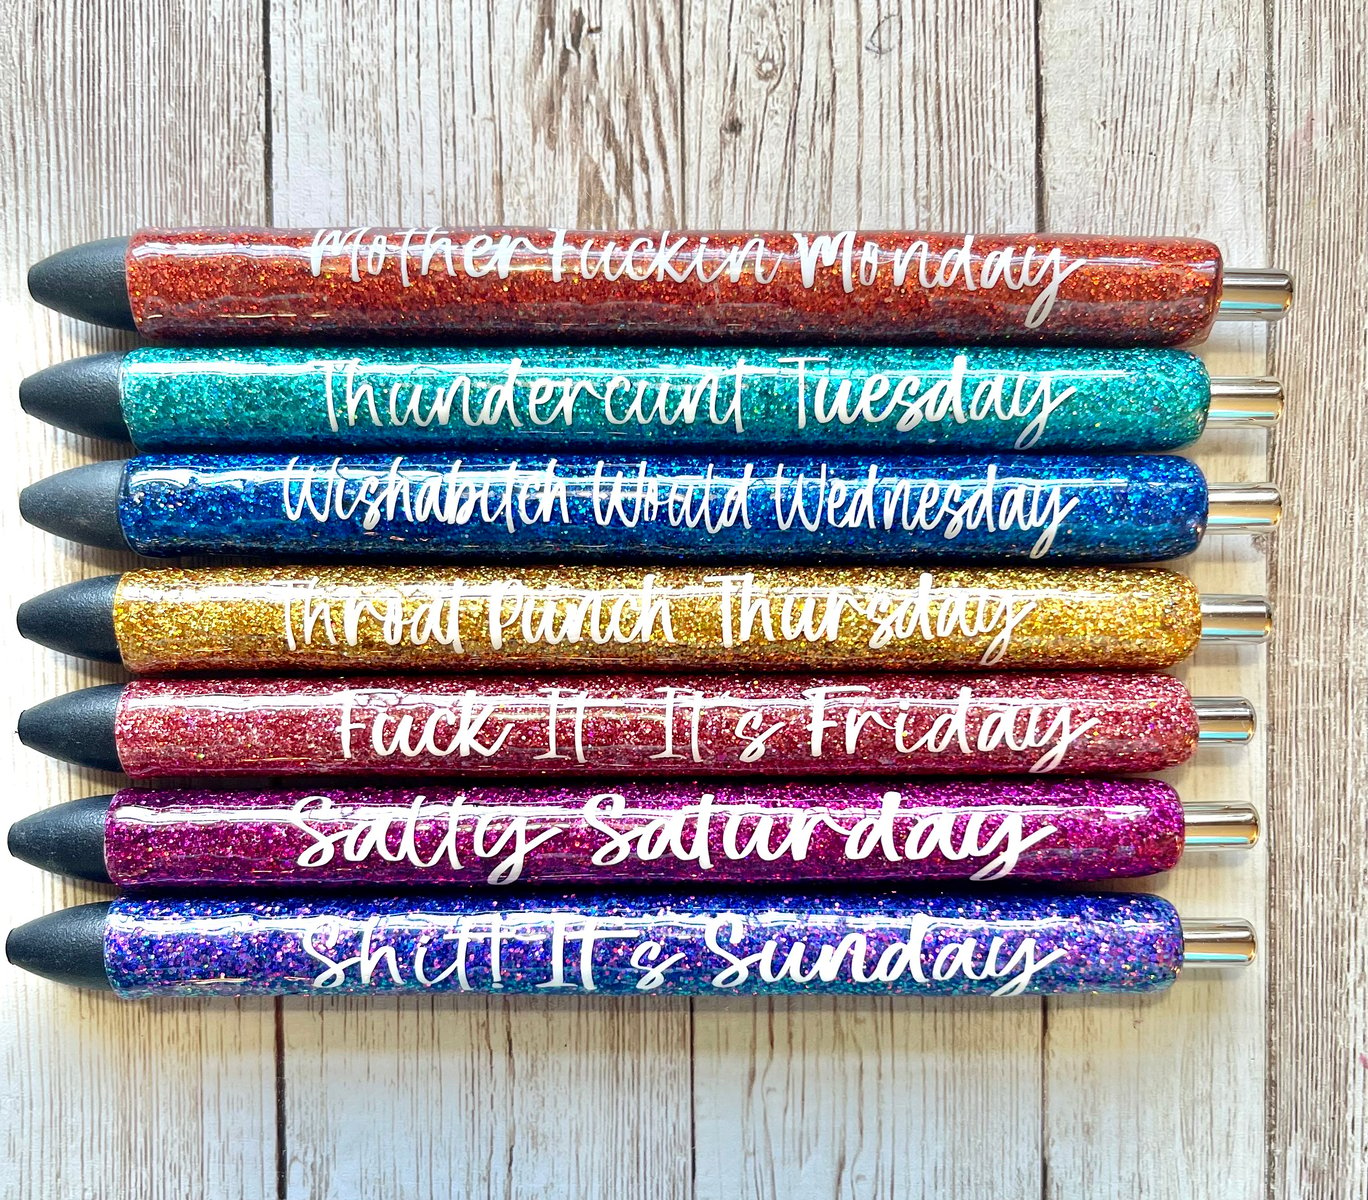 Days Of The Week Solid Color Glitter Pen – Brooklyn's Boutique